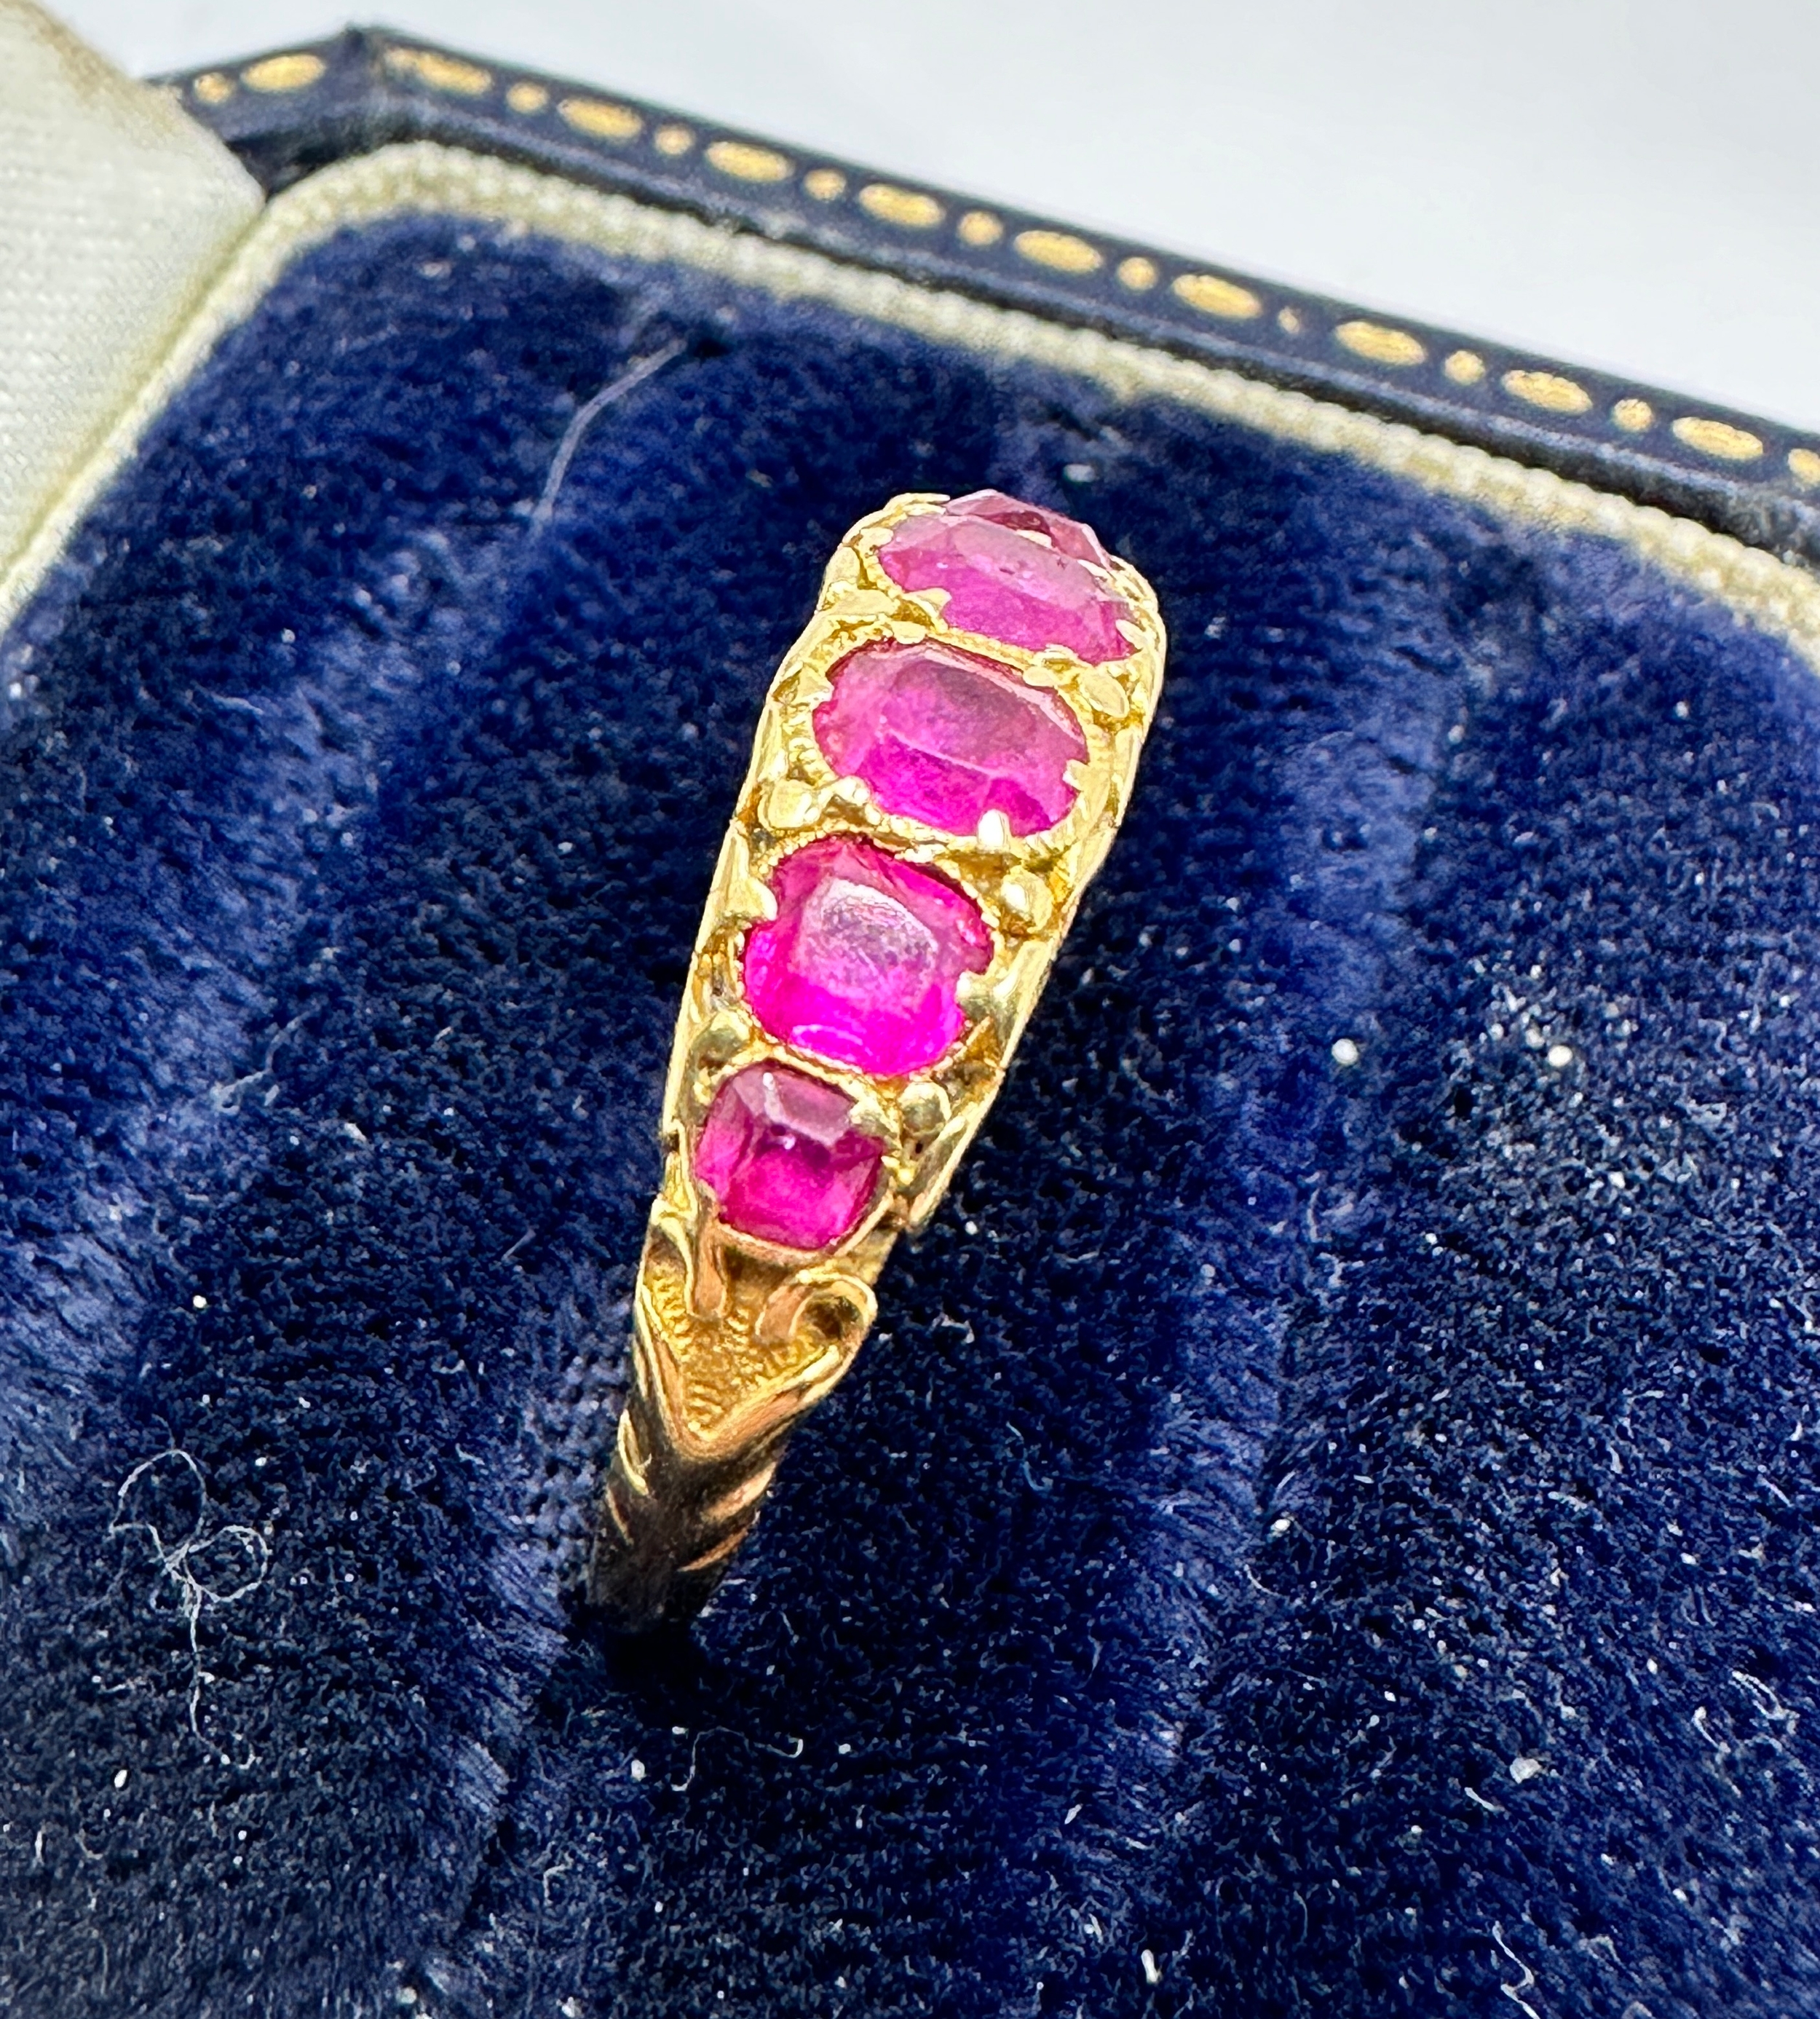 Vintage 18ct gold ruby ring weight 1.8g xrt tested as 18ct - Image 2 of 4